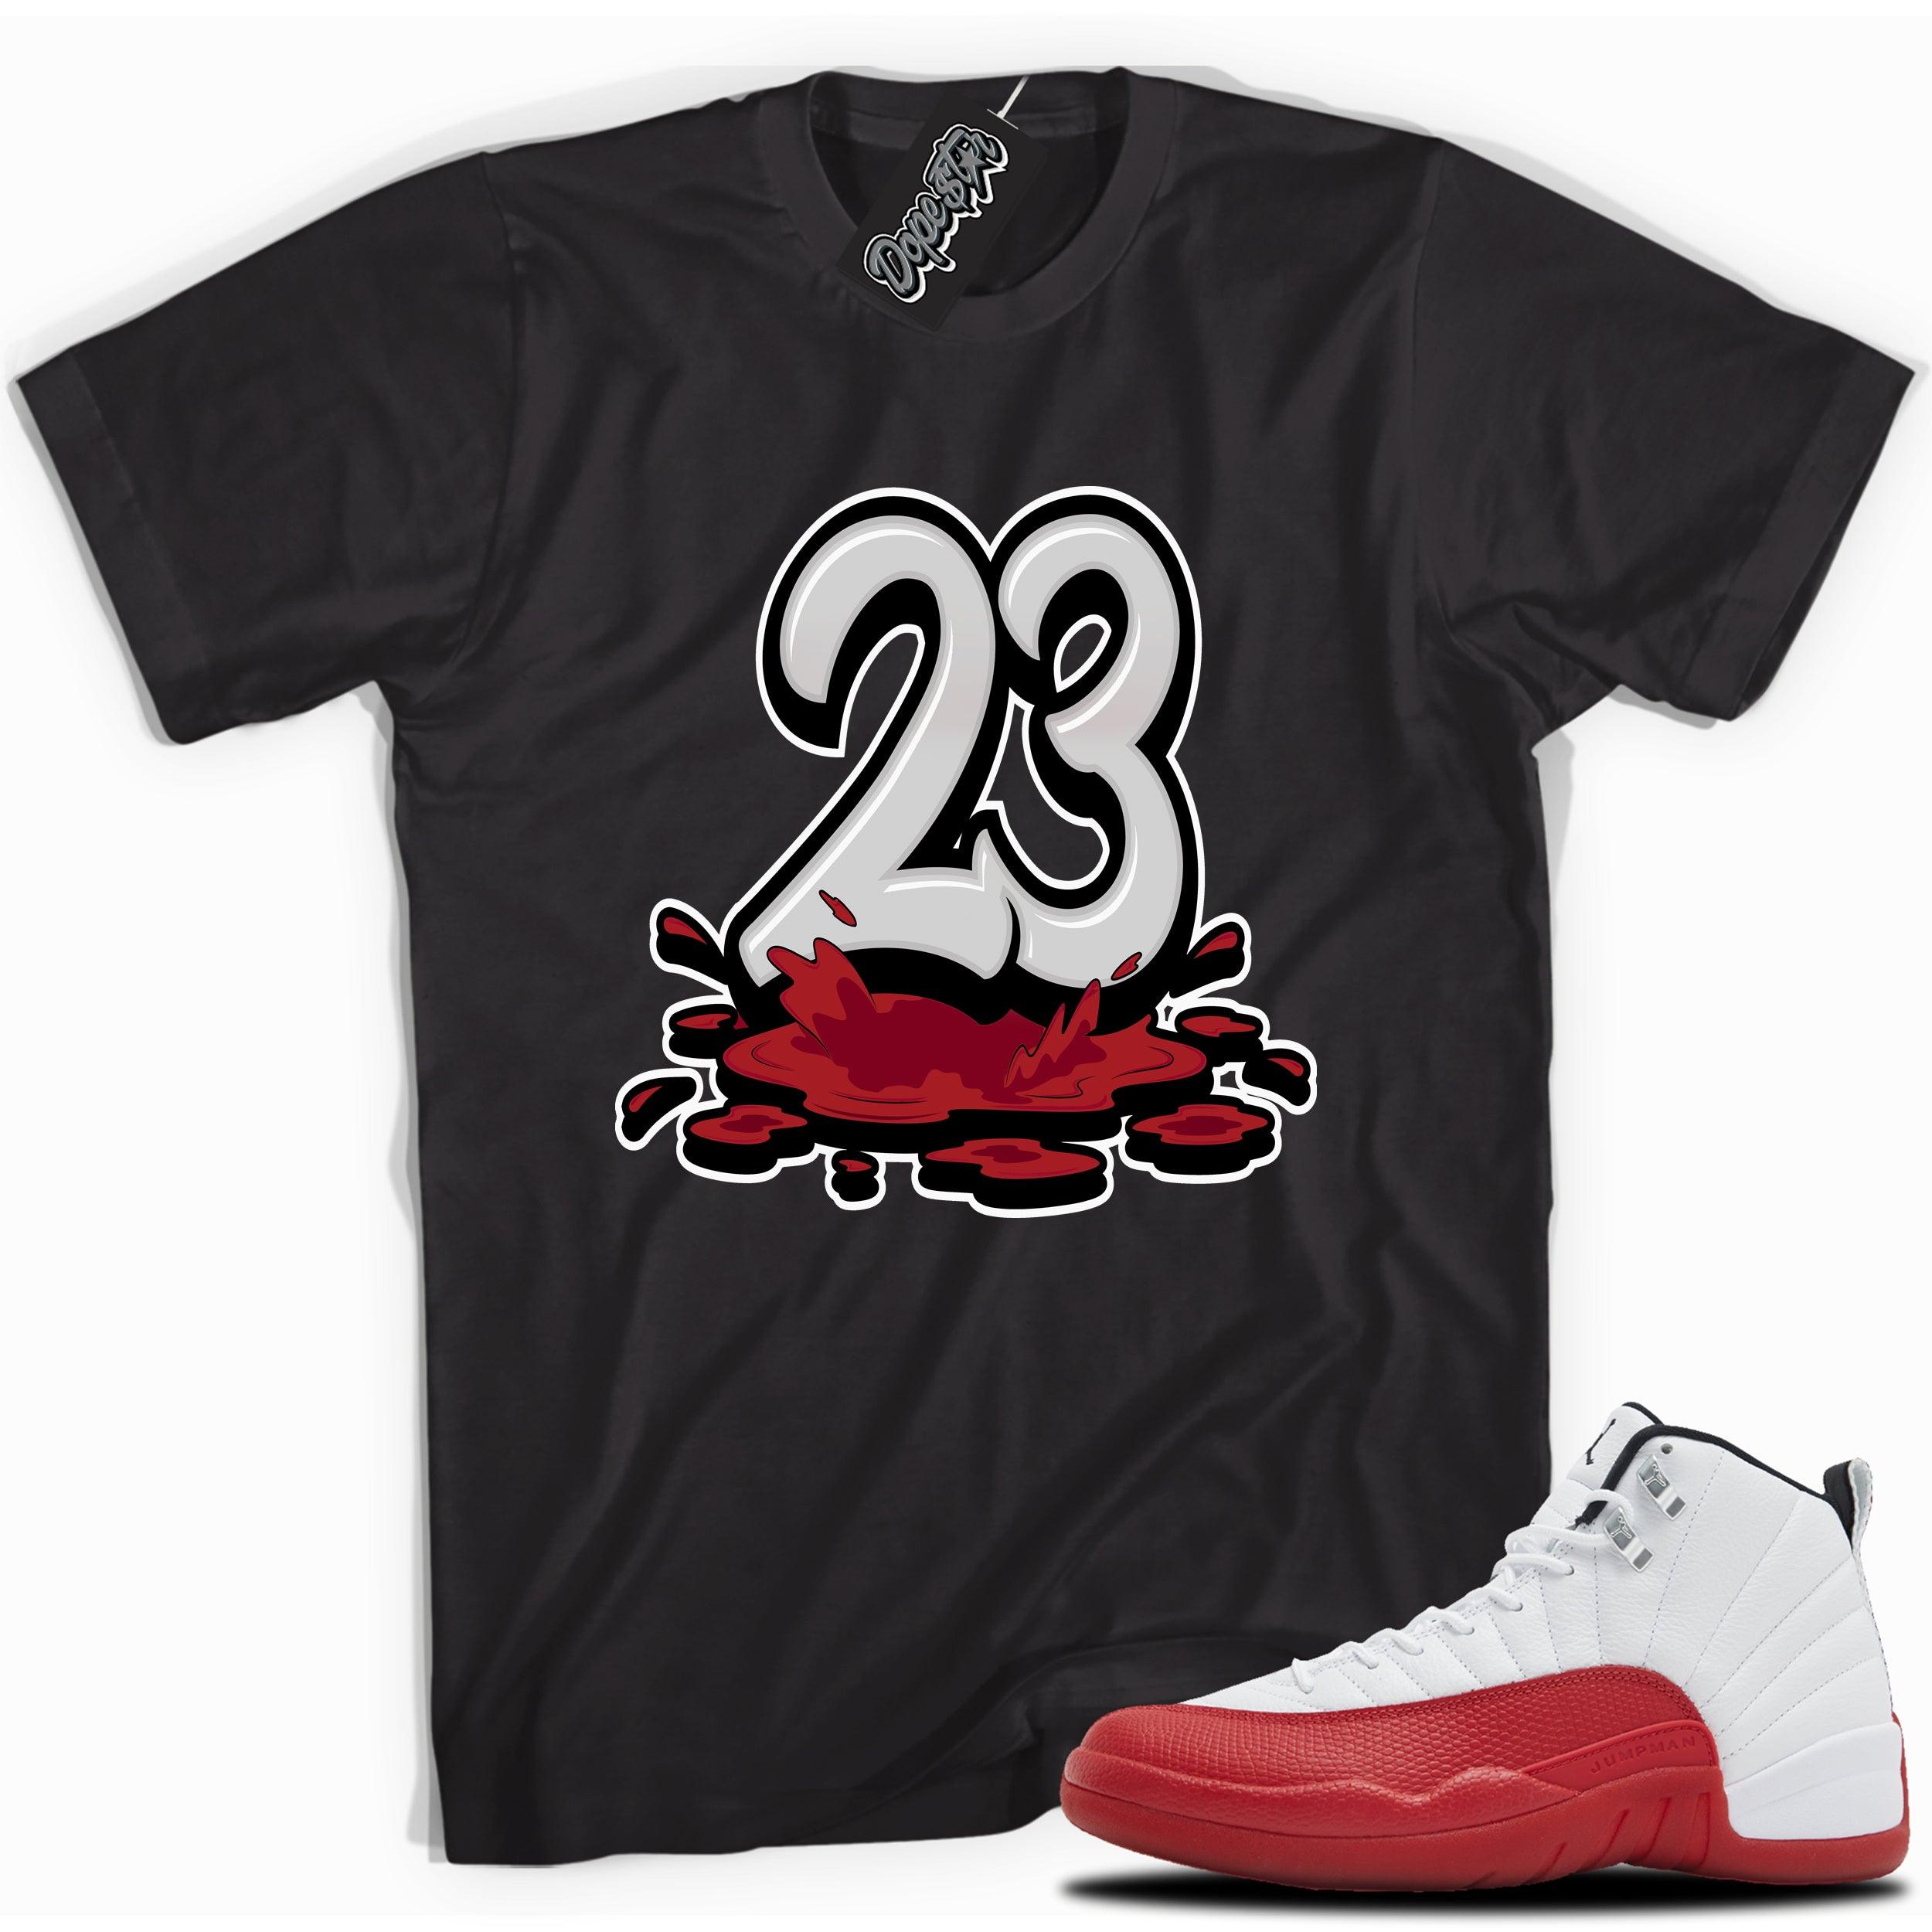 Cool Black graphic tee with “ 23 Melting ” print, that perfectly matches Air Jordan 12 Retro Cherry Red 2023 red and white sneakers